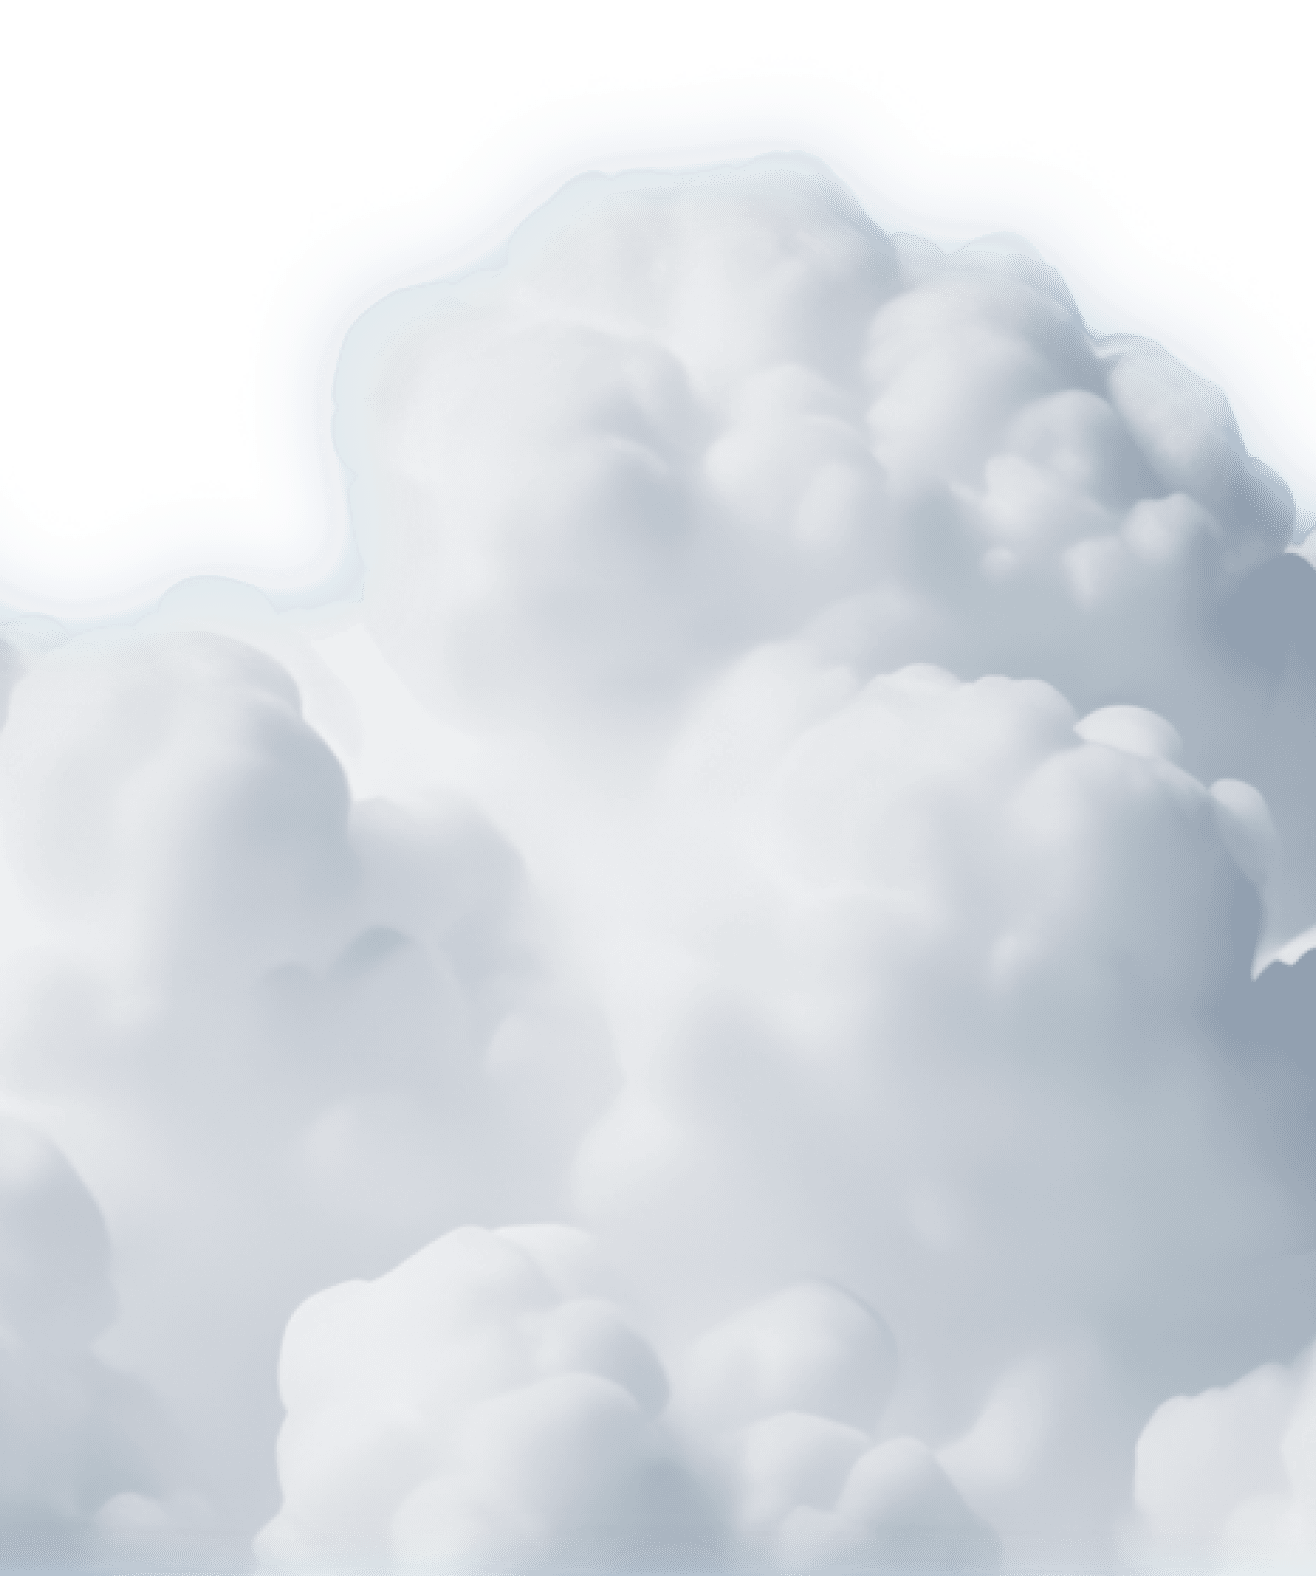 A cluster of fluffy white clouds against a transparent background.